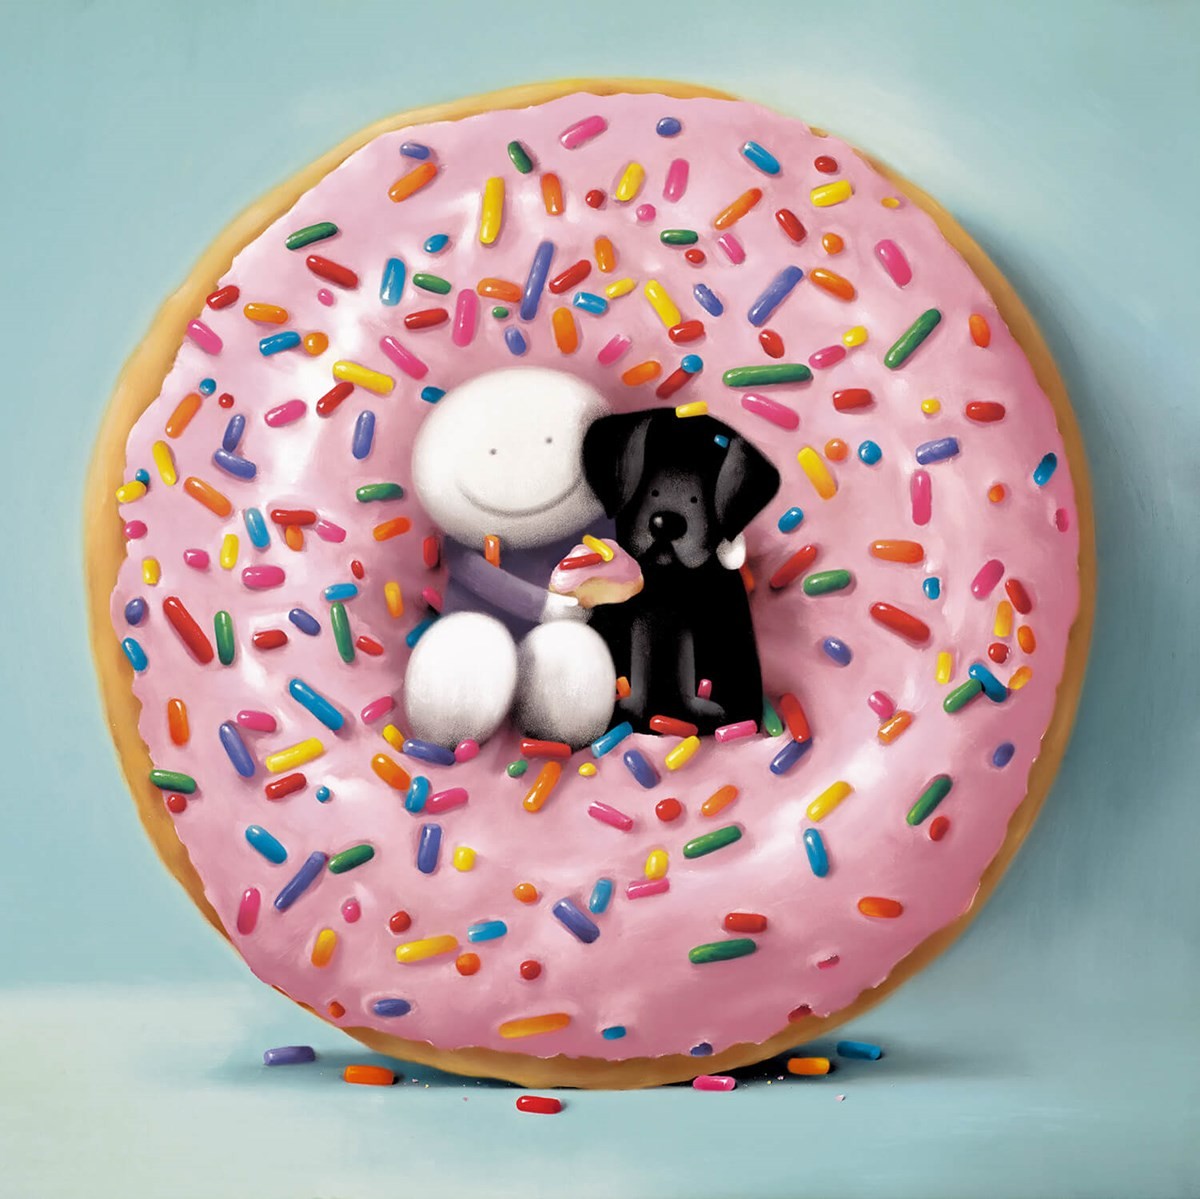 I Love You Hundreds and Thousands by Doug Hyde